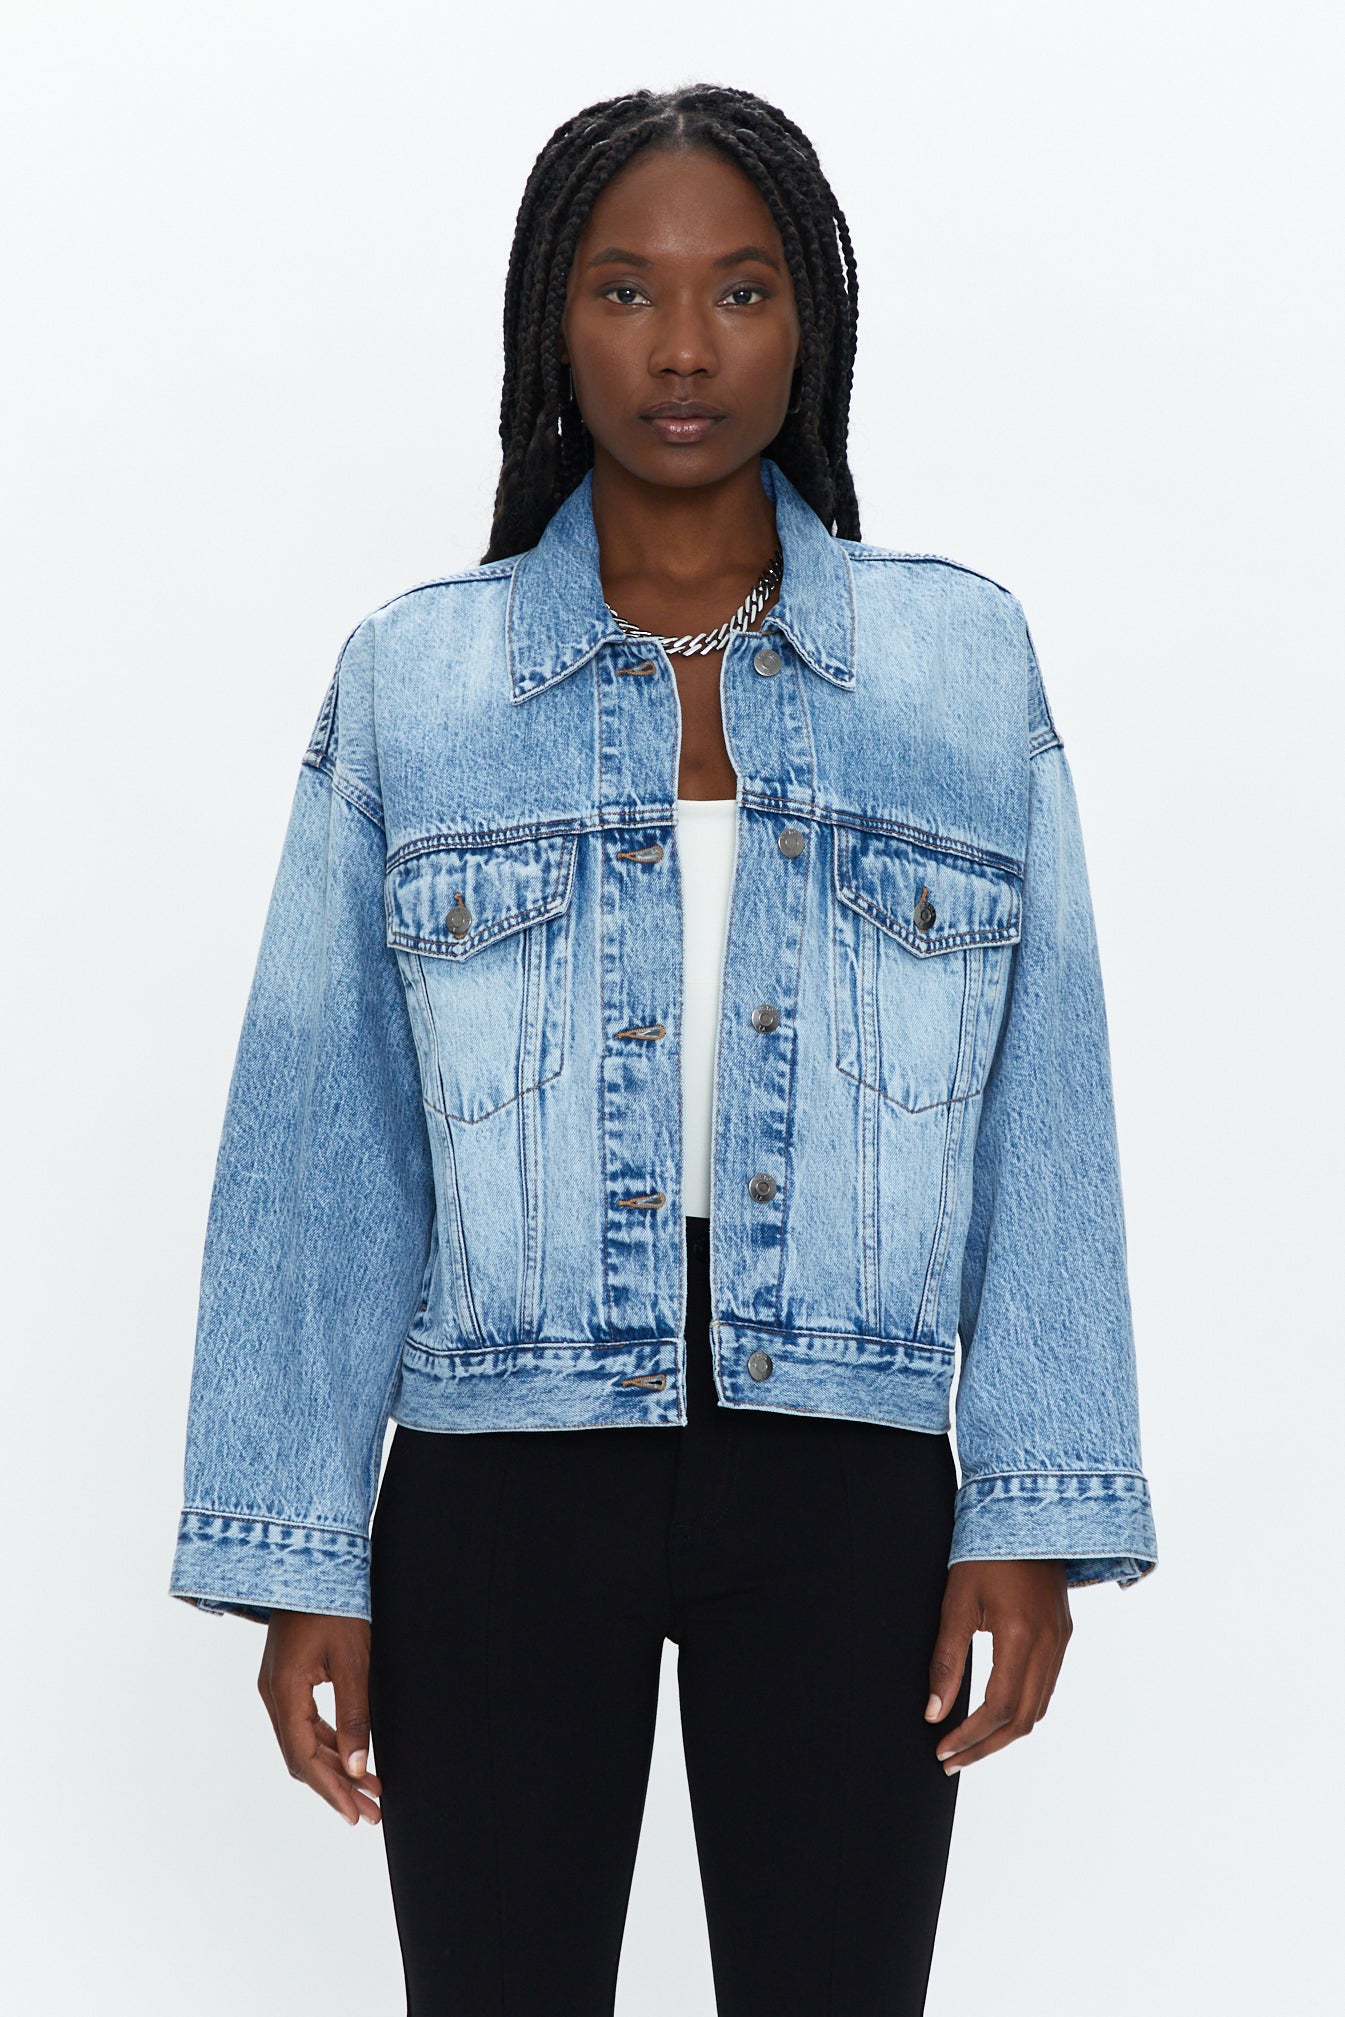 Amazon Dropped Deals on Levi's Jean Jackets—Up to 50% Off